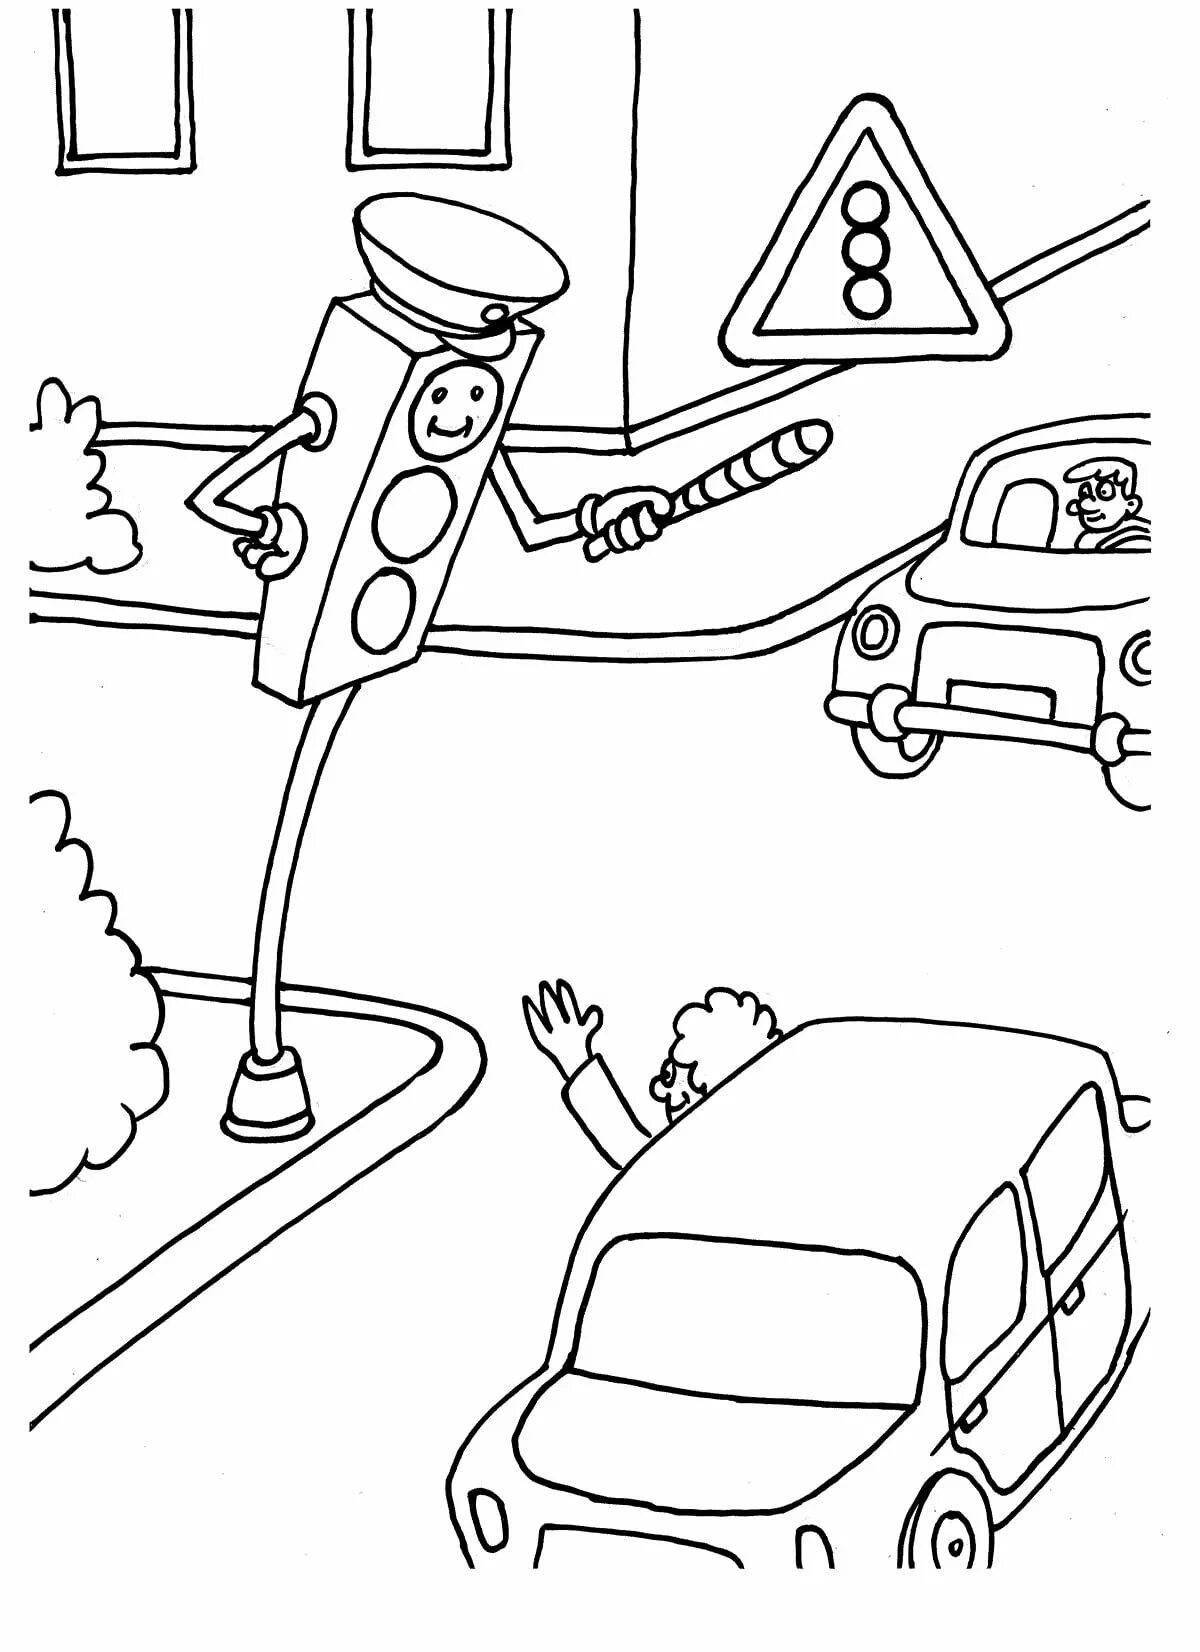 Humorous rules of the road coloring book for 1st grade